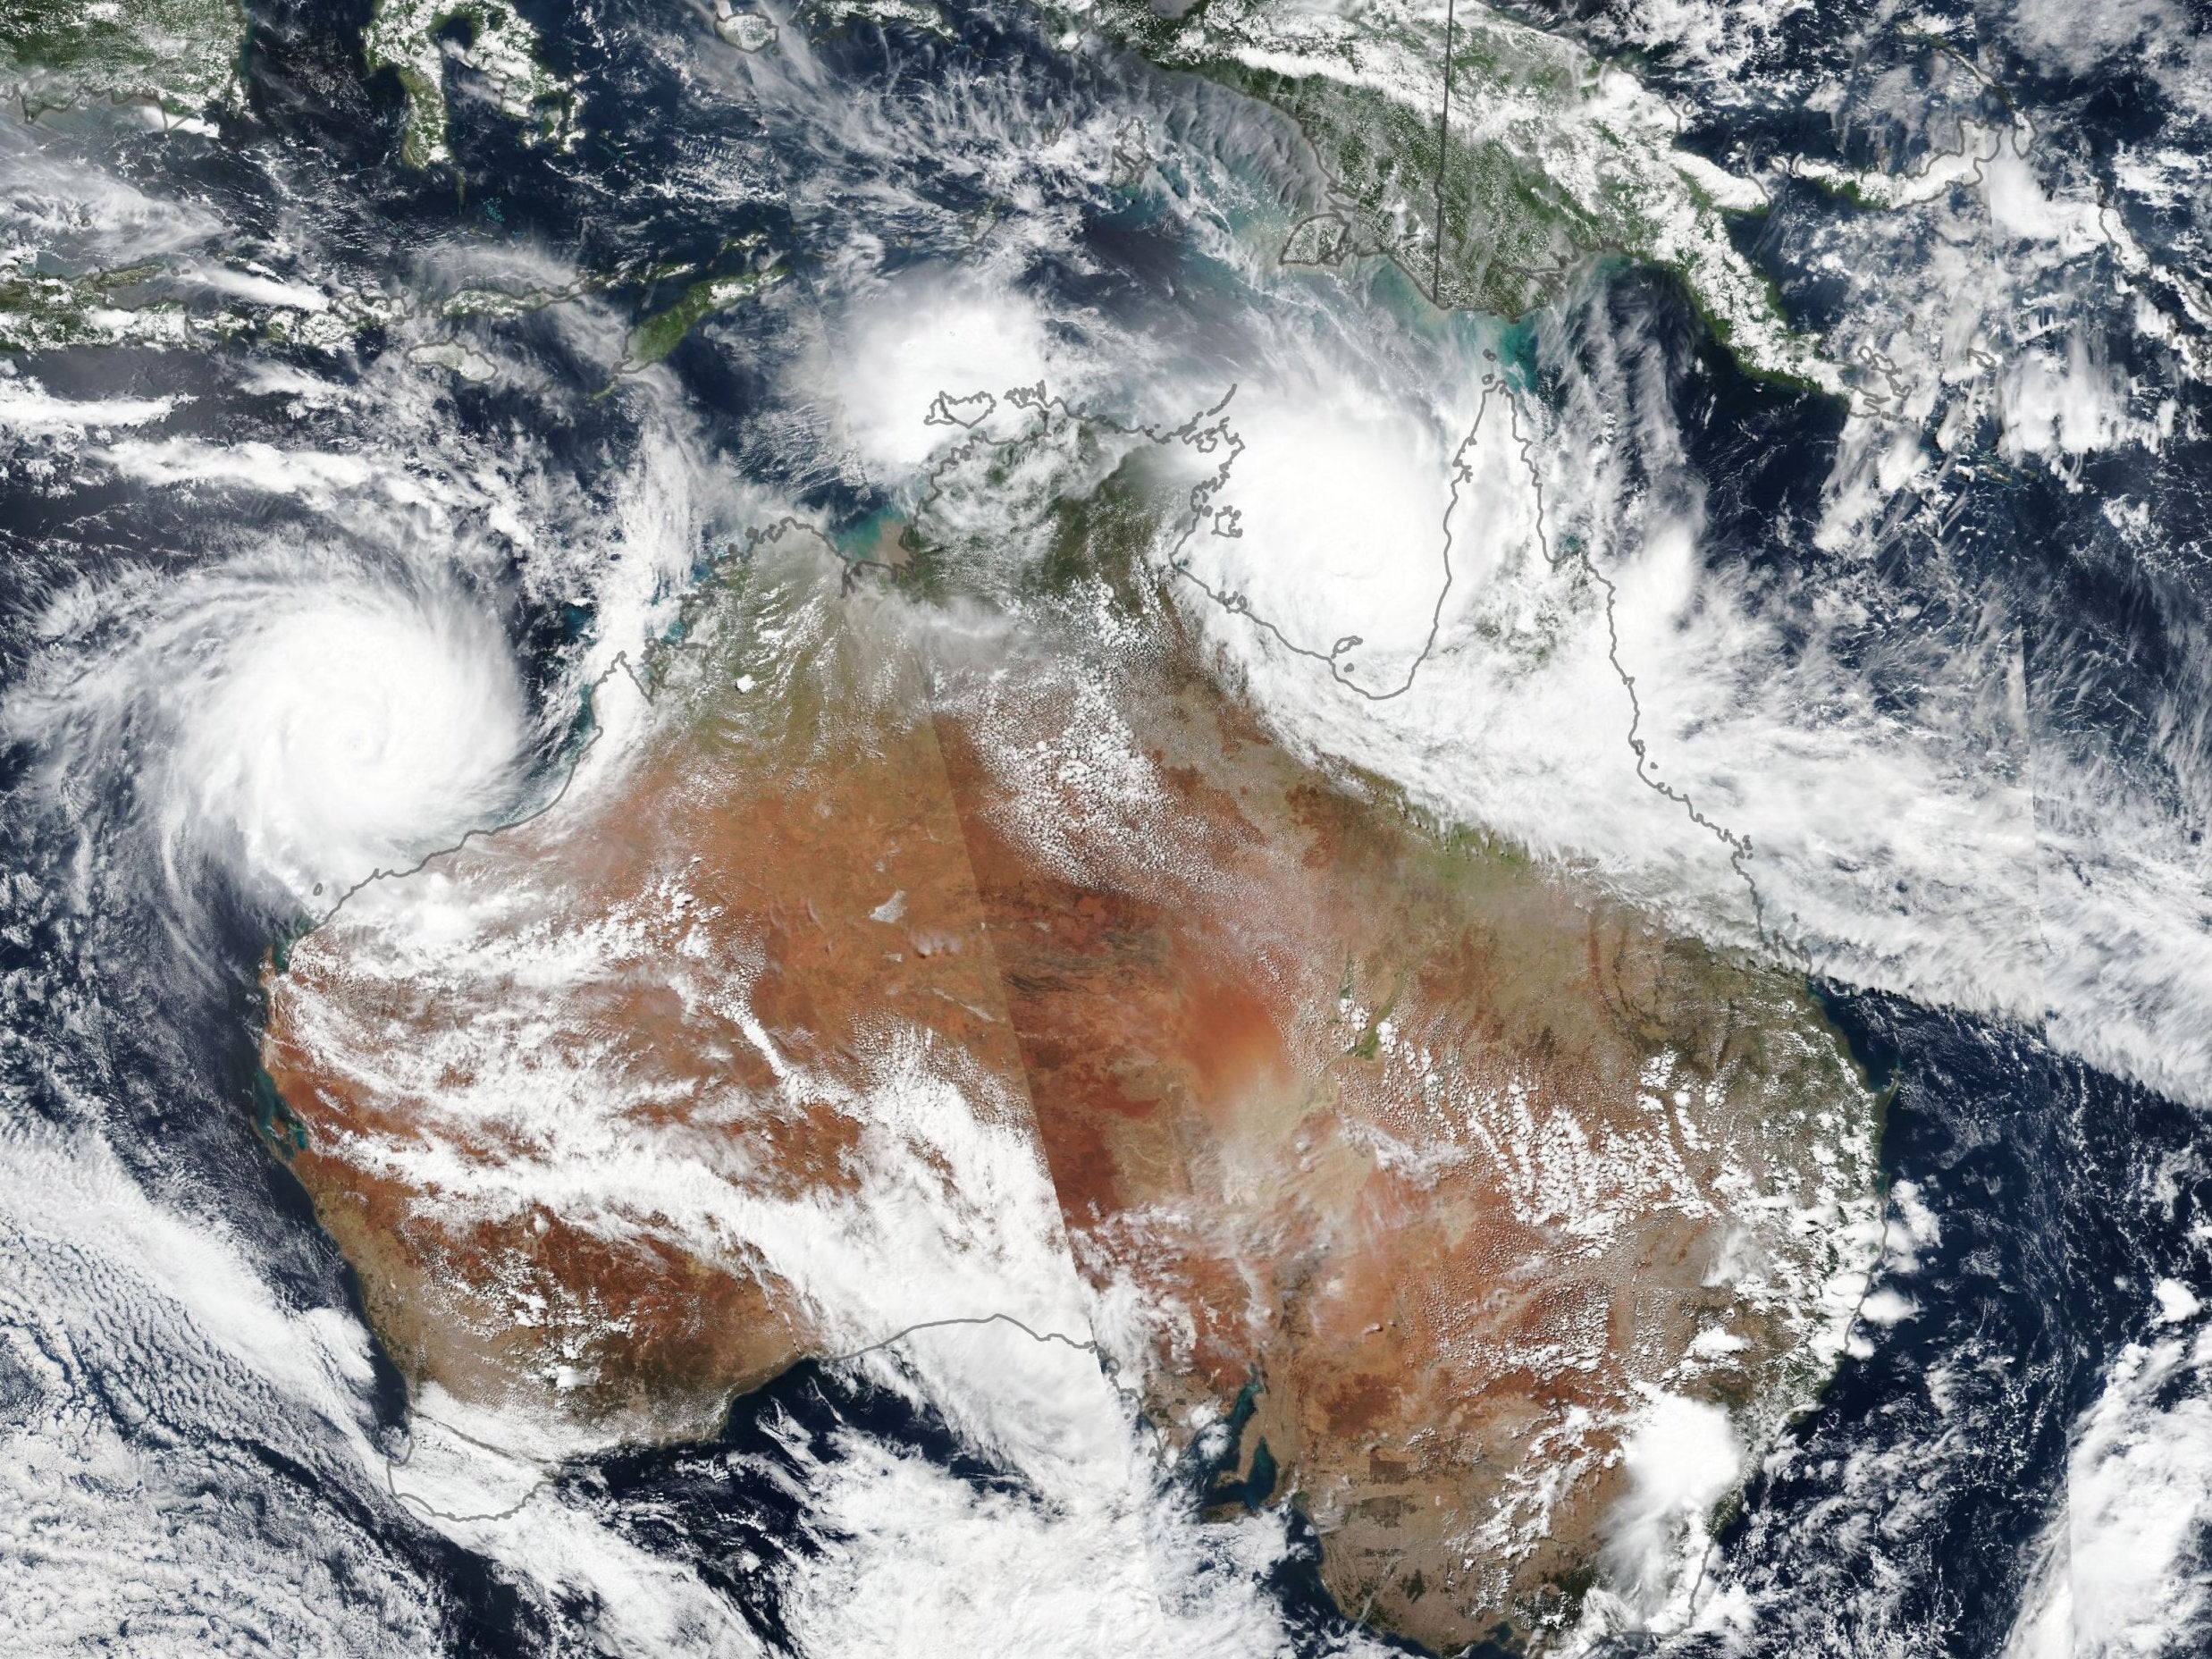 Satellite image from NASA shows two severe tropical cyclones over northern Australia on 22 March 2019. Cyclone Veronica (L) is seen over Western Australia and Cyclone Trevor over Northern Territory (top-R). At the time of the image, cyclones Trevor and Veronica both had sustained winds of roughly 175 km per hour, NASA said.